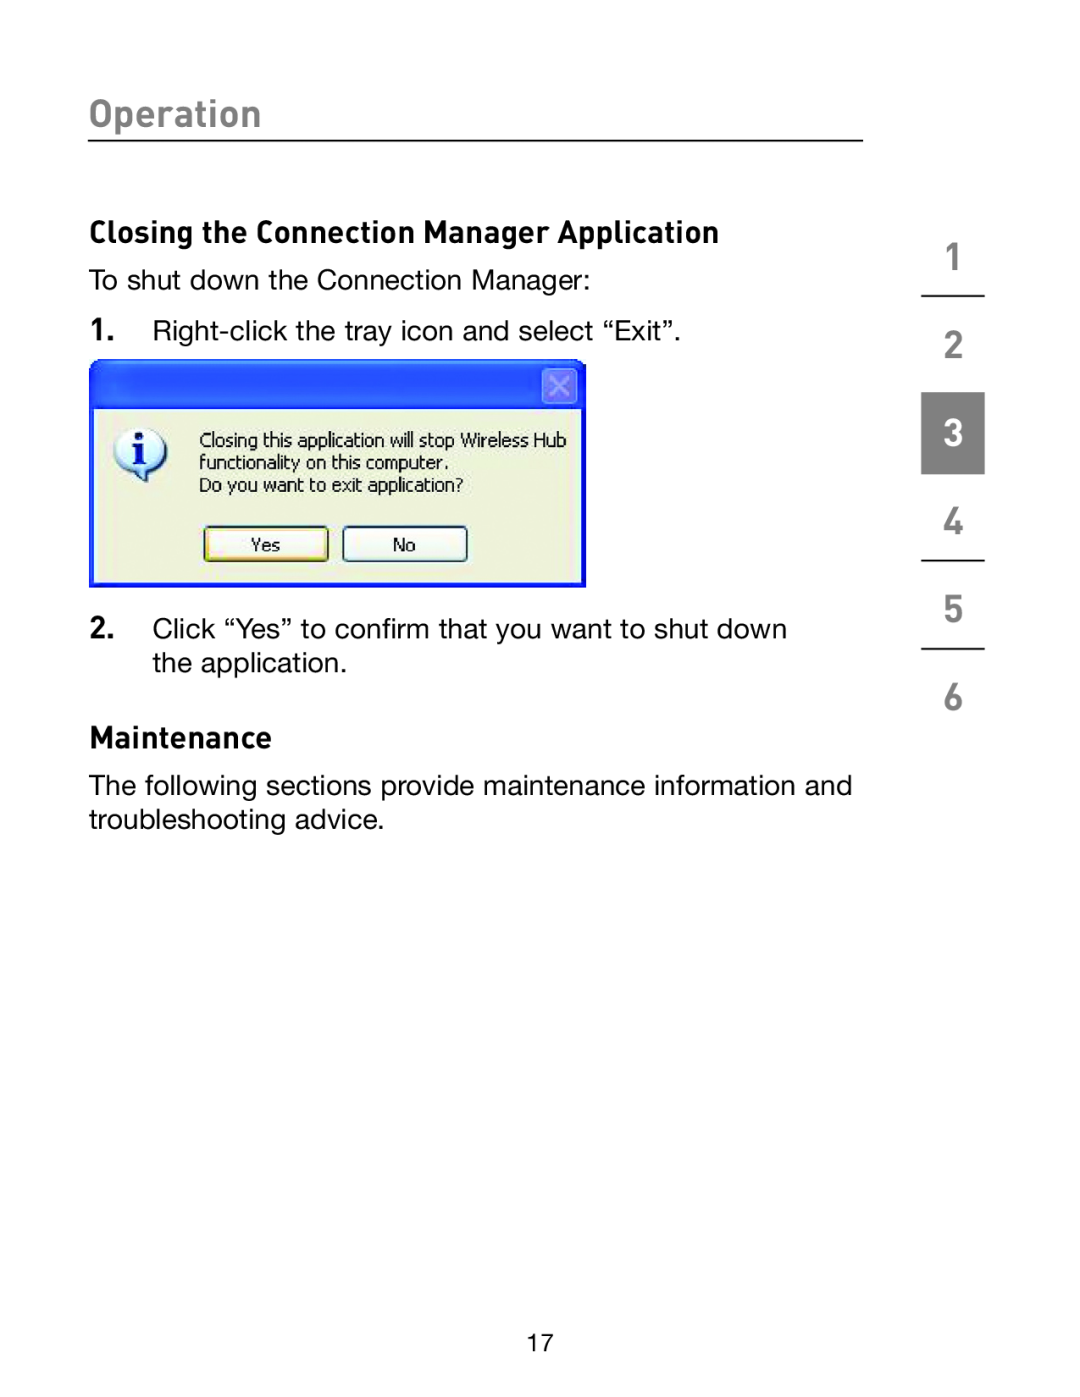 Belkin F5U301 Closing the Connection Manager Application, Maintenance, Operation, To shut down the Connection Manager 